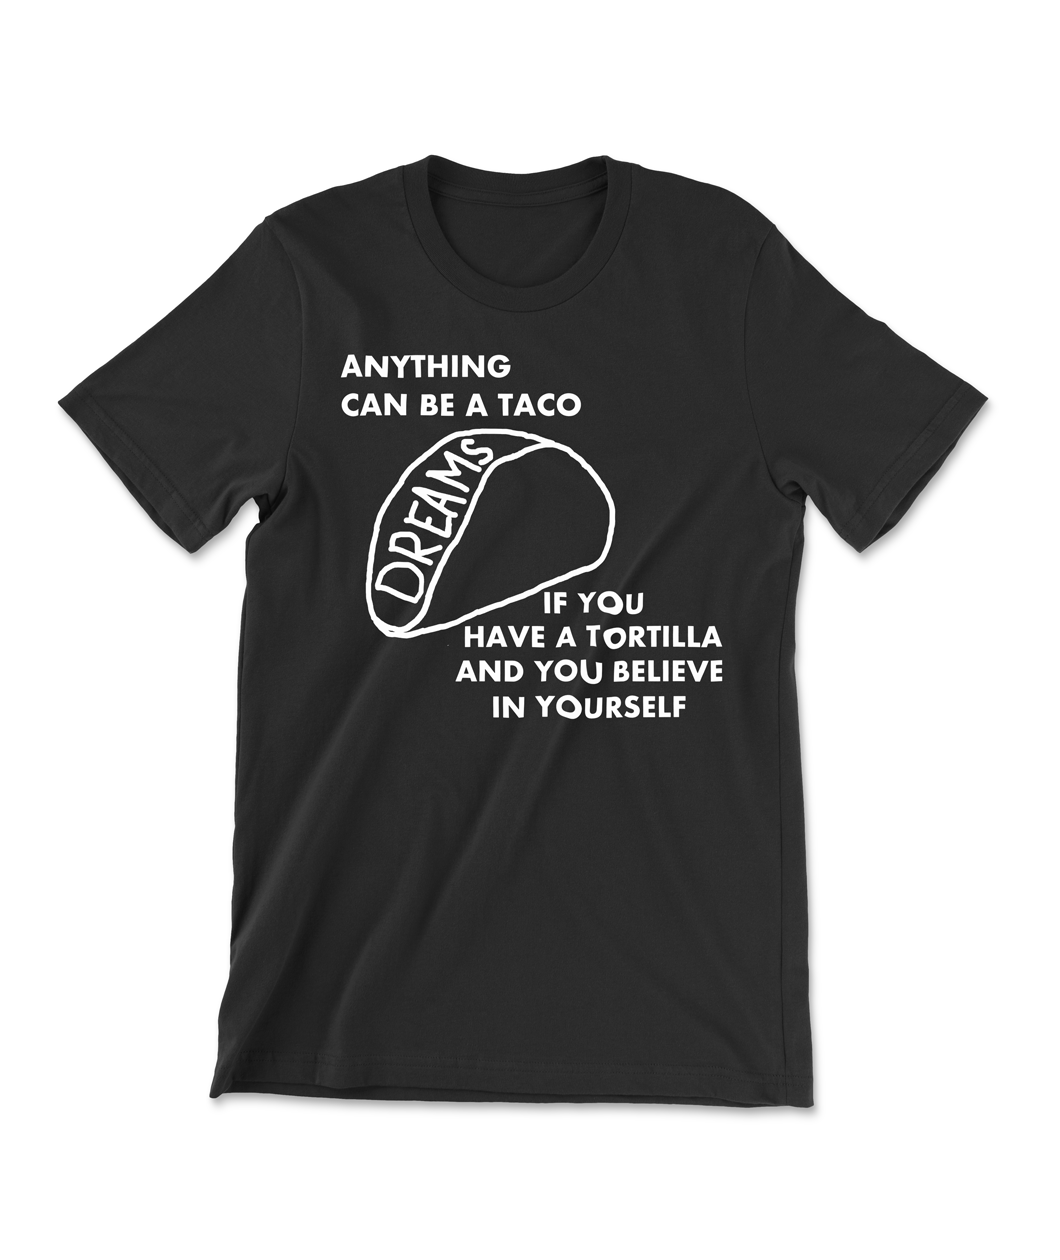 A black shirt with a taco, drawn with the word 